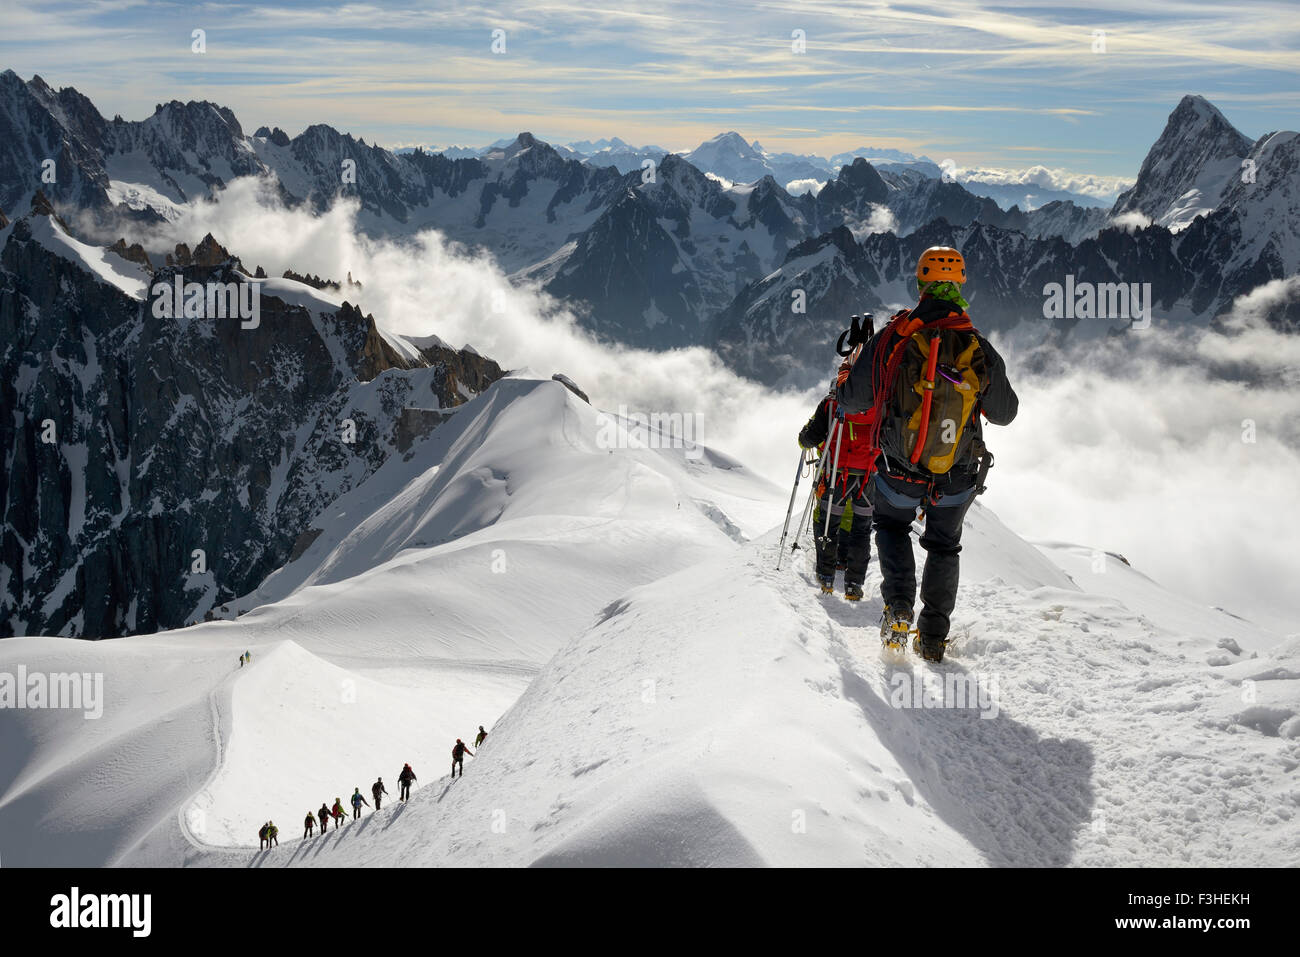 Mountaineers and climbers, Aiguille du Midi, Mont Blanc Massif, Chamonix, French Alps, Haute Savoie, France, Europe Stock Photo